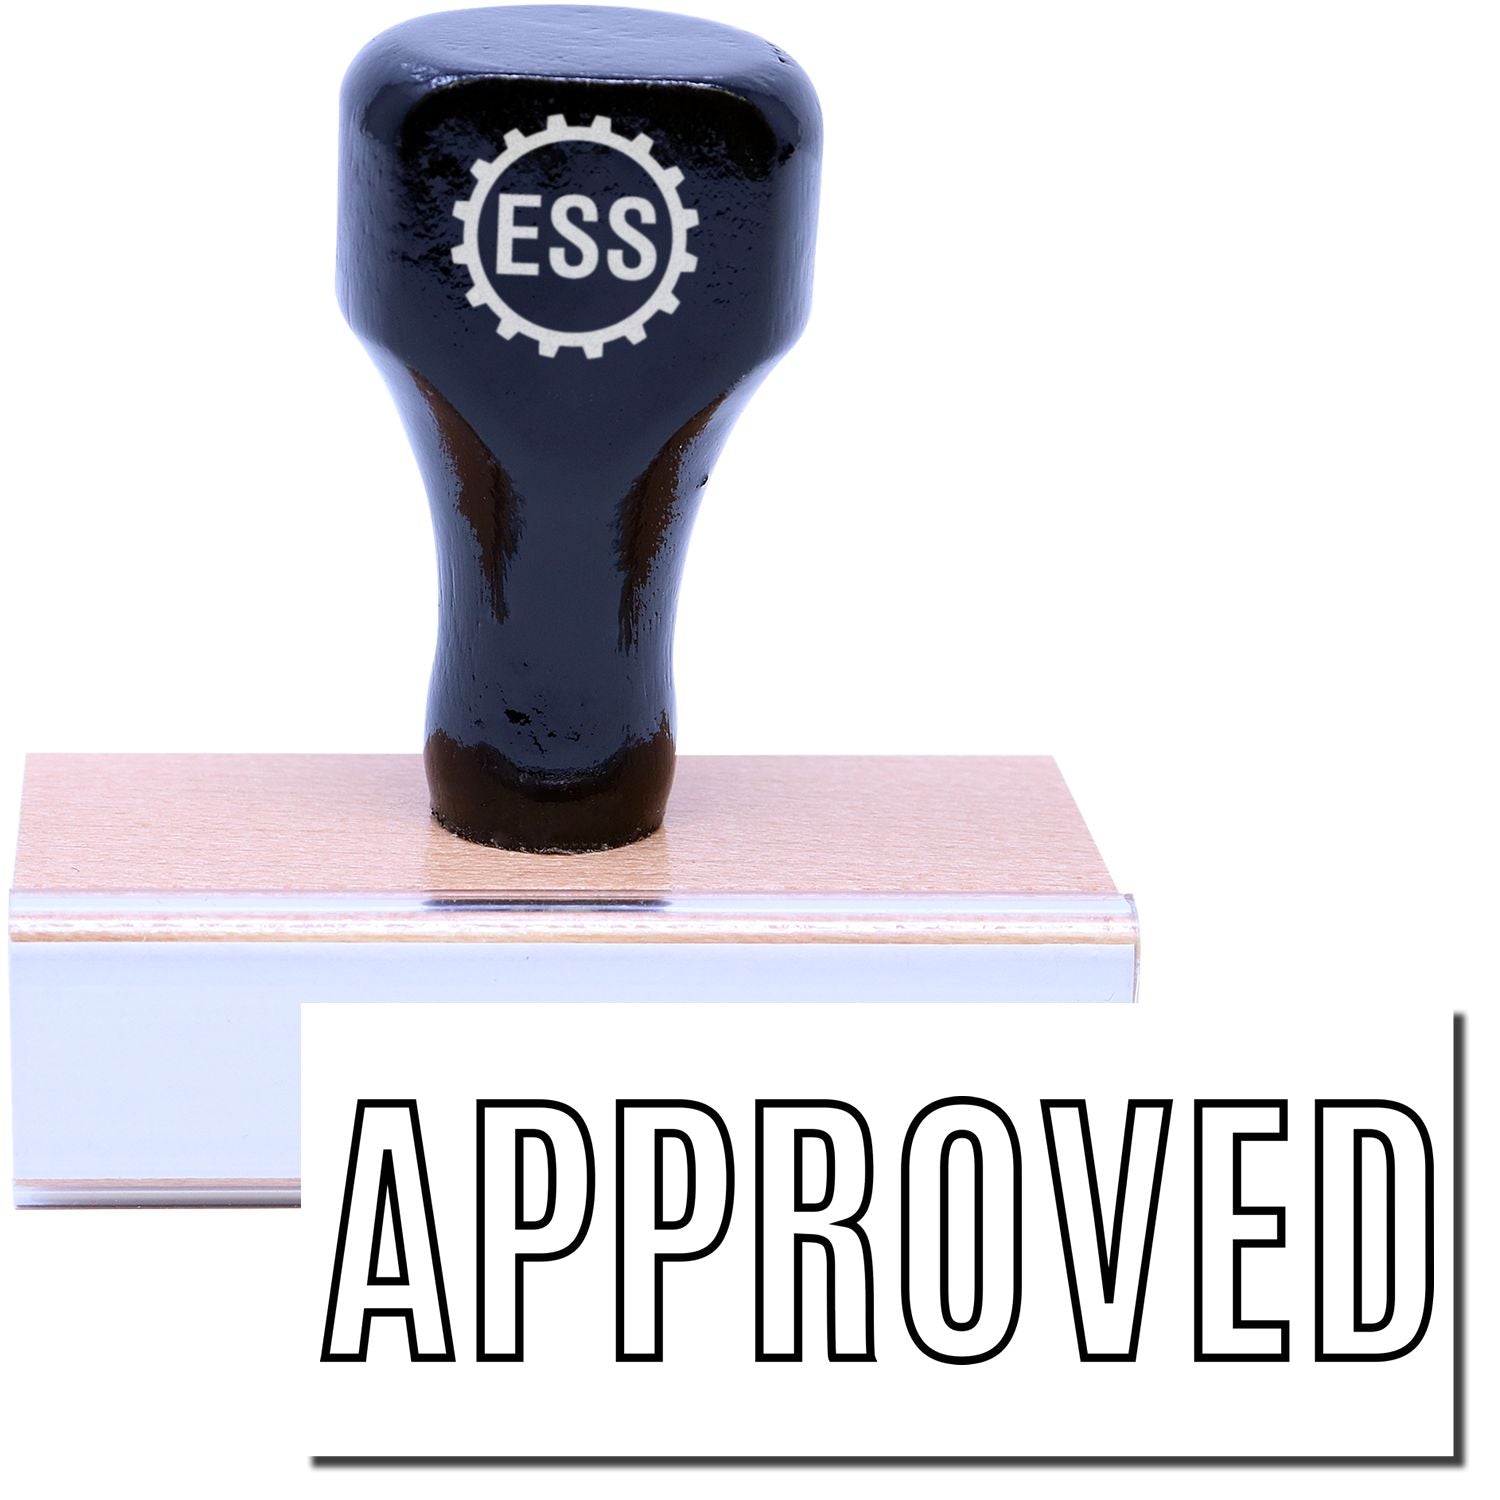 A stock office rubber stamp with a stamped image showing how the text "APPROVED" in an outline font is displayed after stamping.